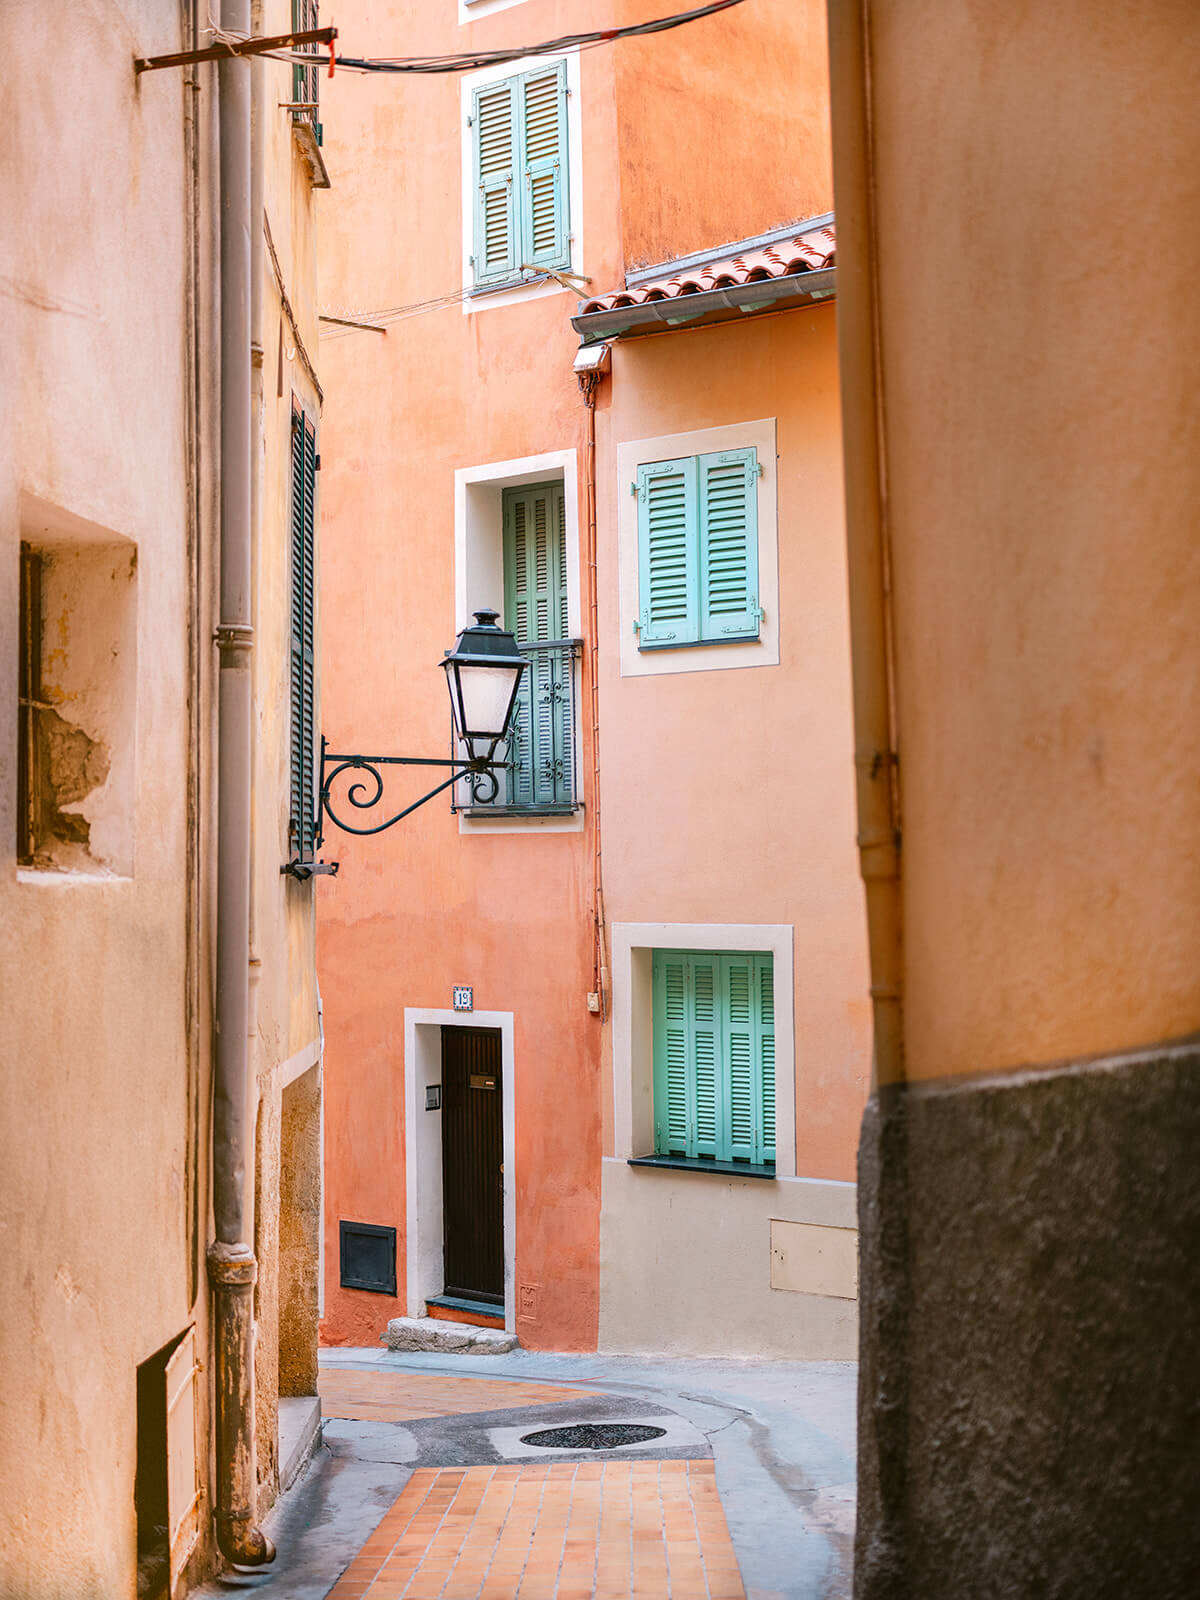 Colorful travel photography in Menton, South of France - by Raisa Zwart